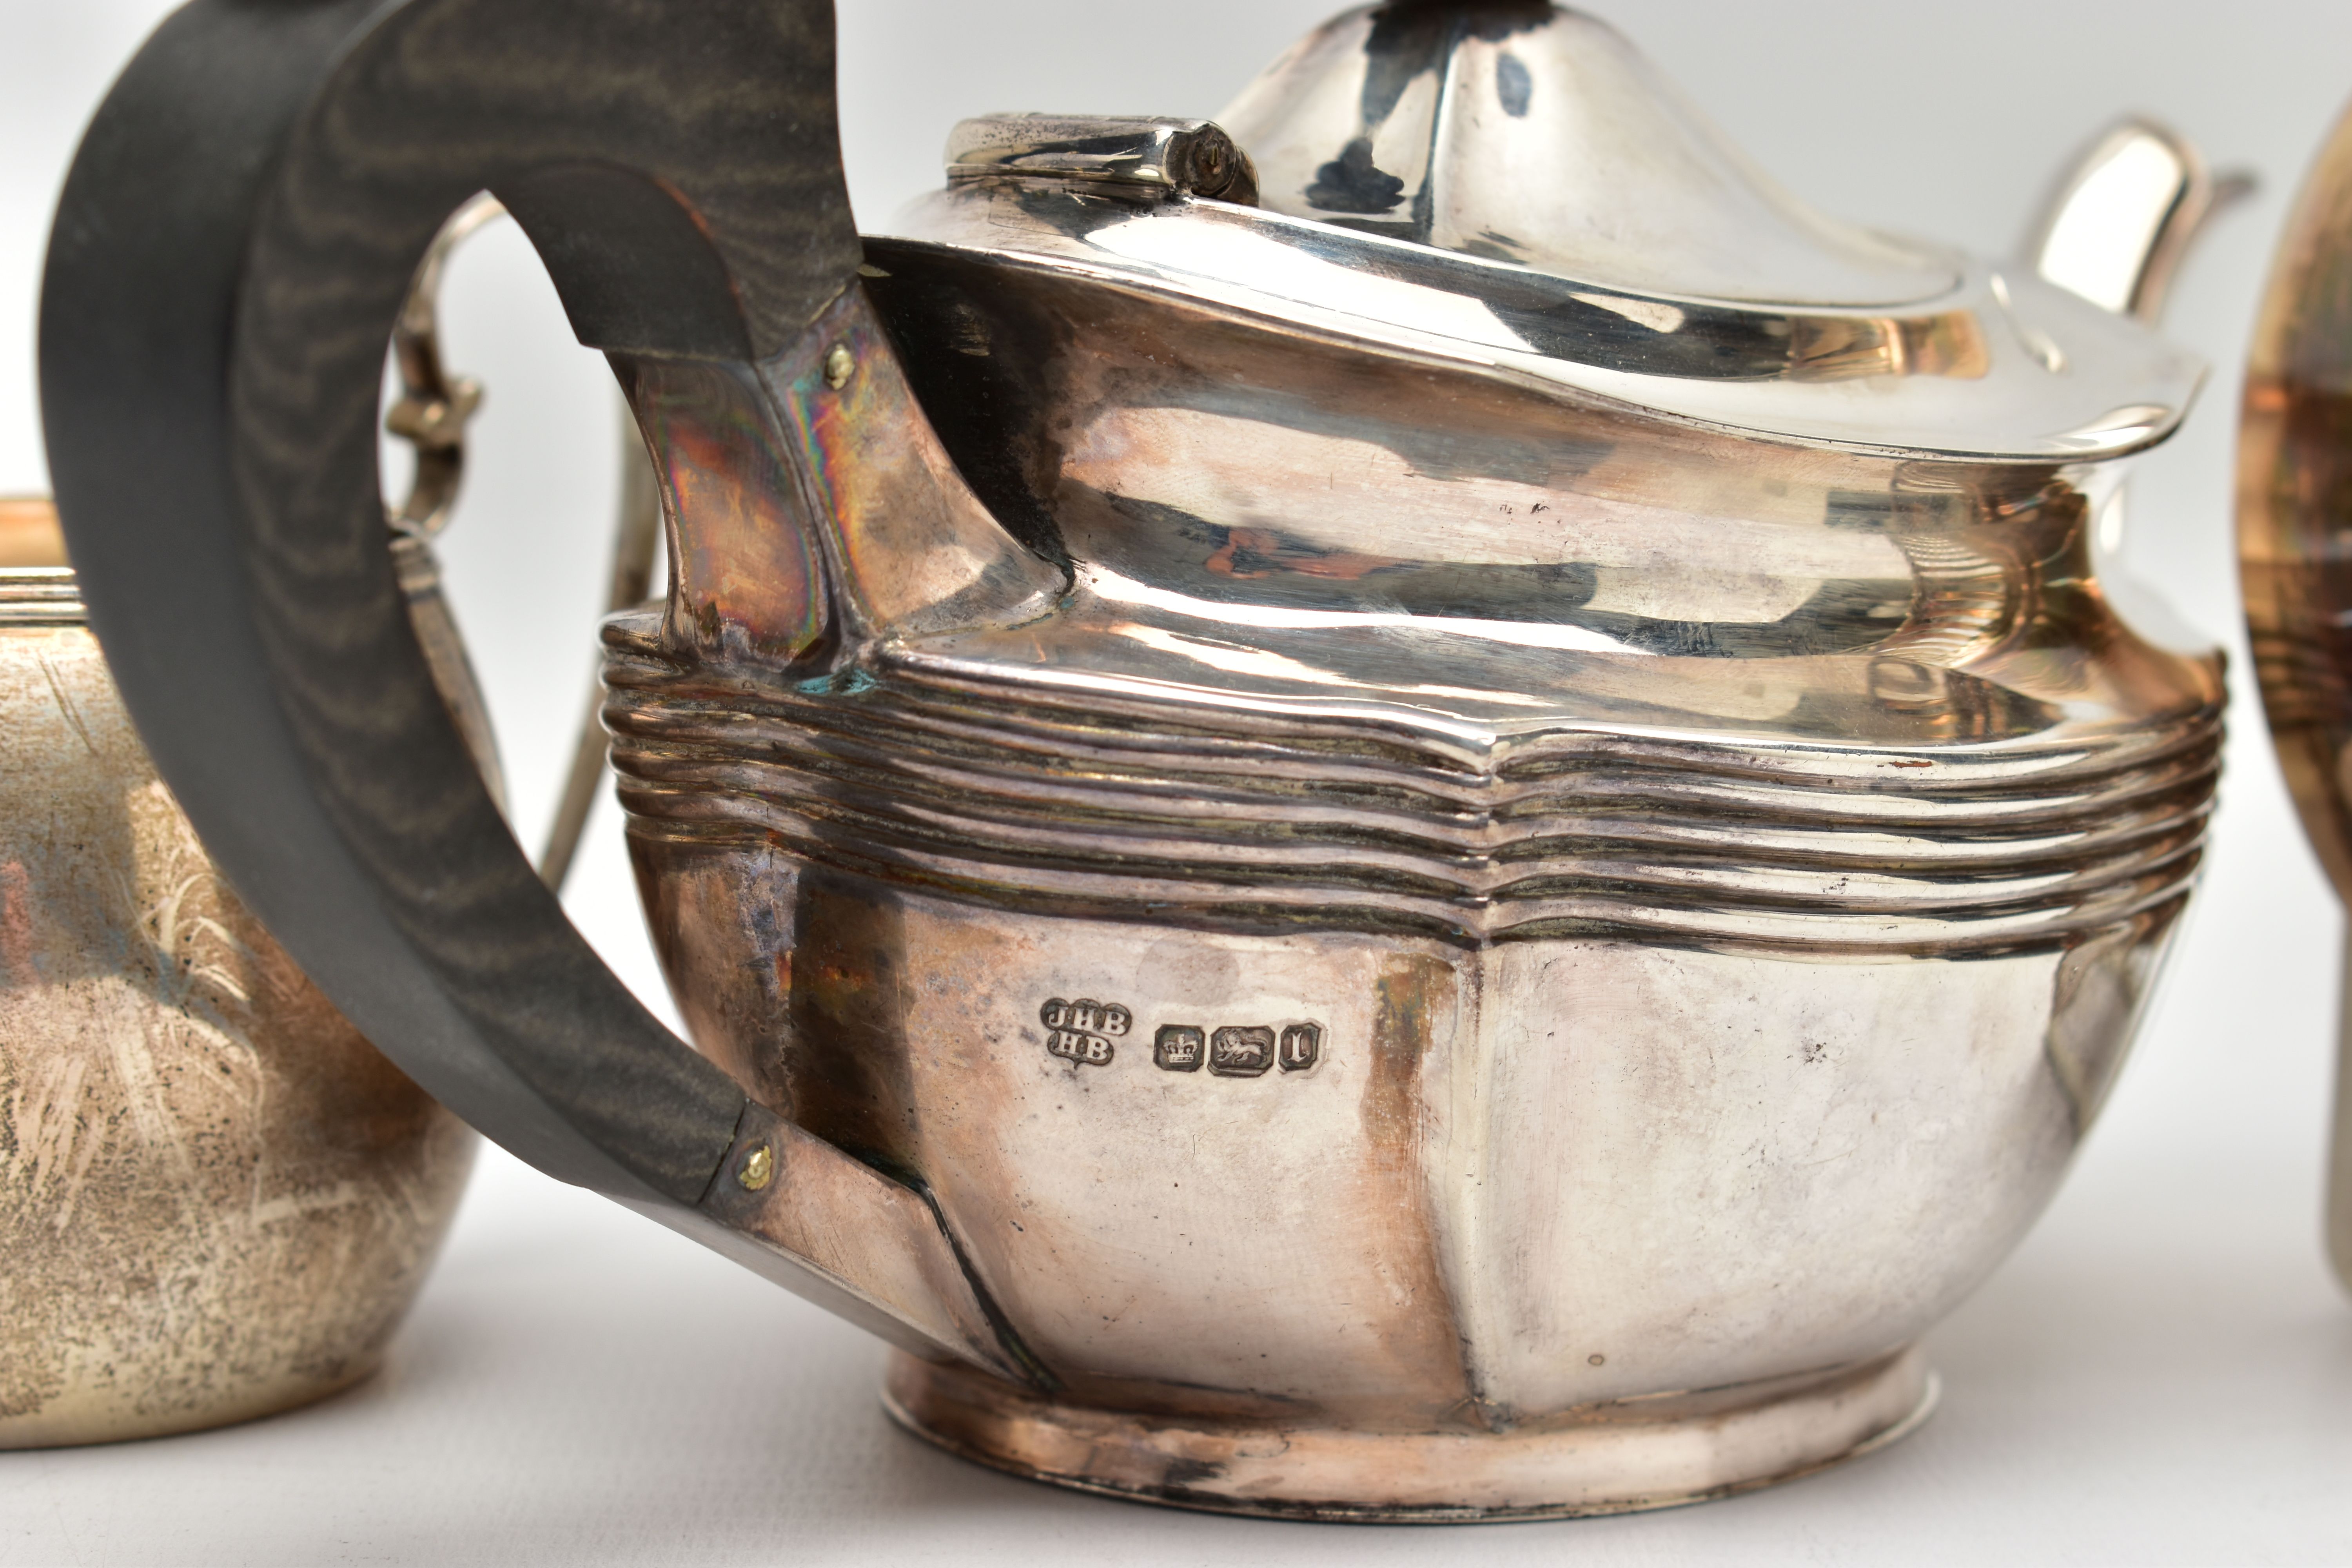 AN EDWARDIAN SILVER BACHELOR'S TEA POT OF SHAPED OVAL FORM, A TWIN HANDLED SILVER SUGAR BOWL AND A - Image 4 of 9